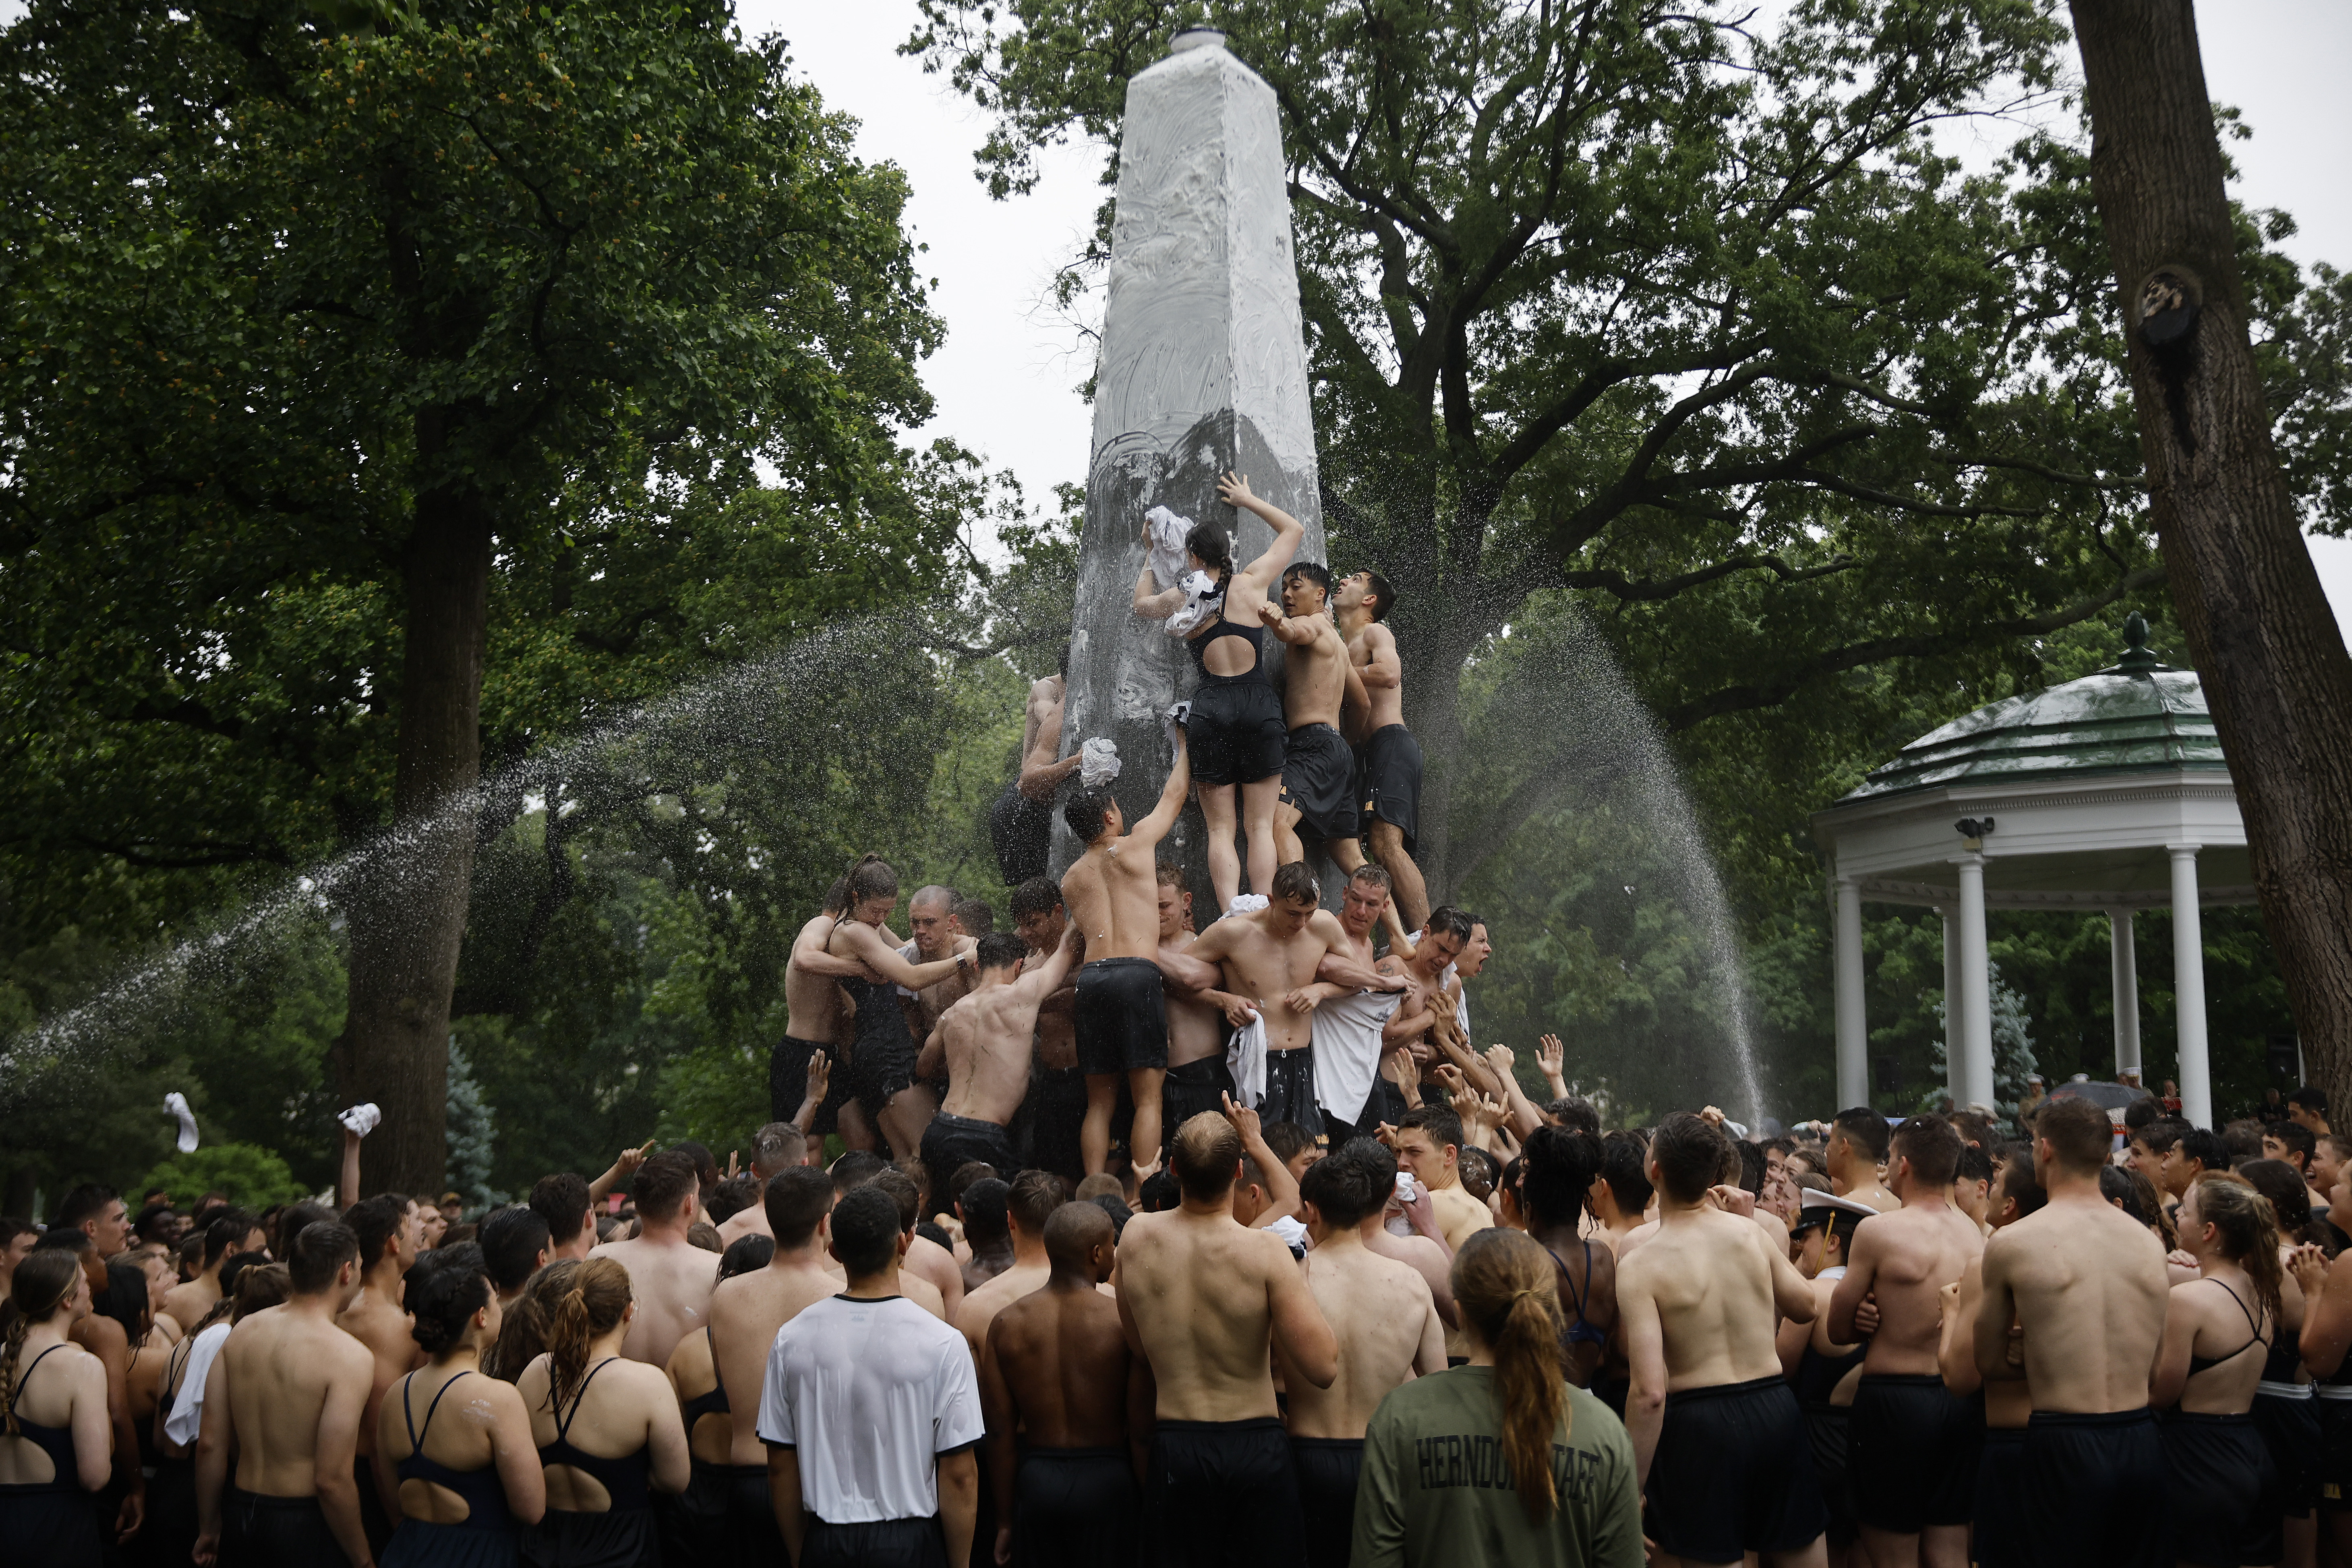 Photos: Plebes continue tradition, scale greased 21-foot monument